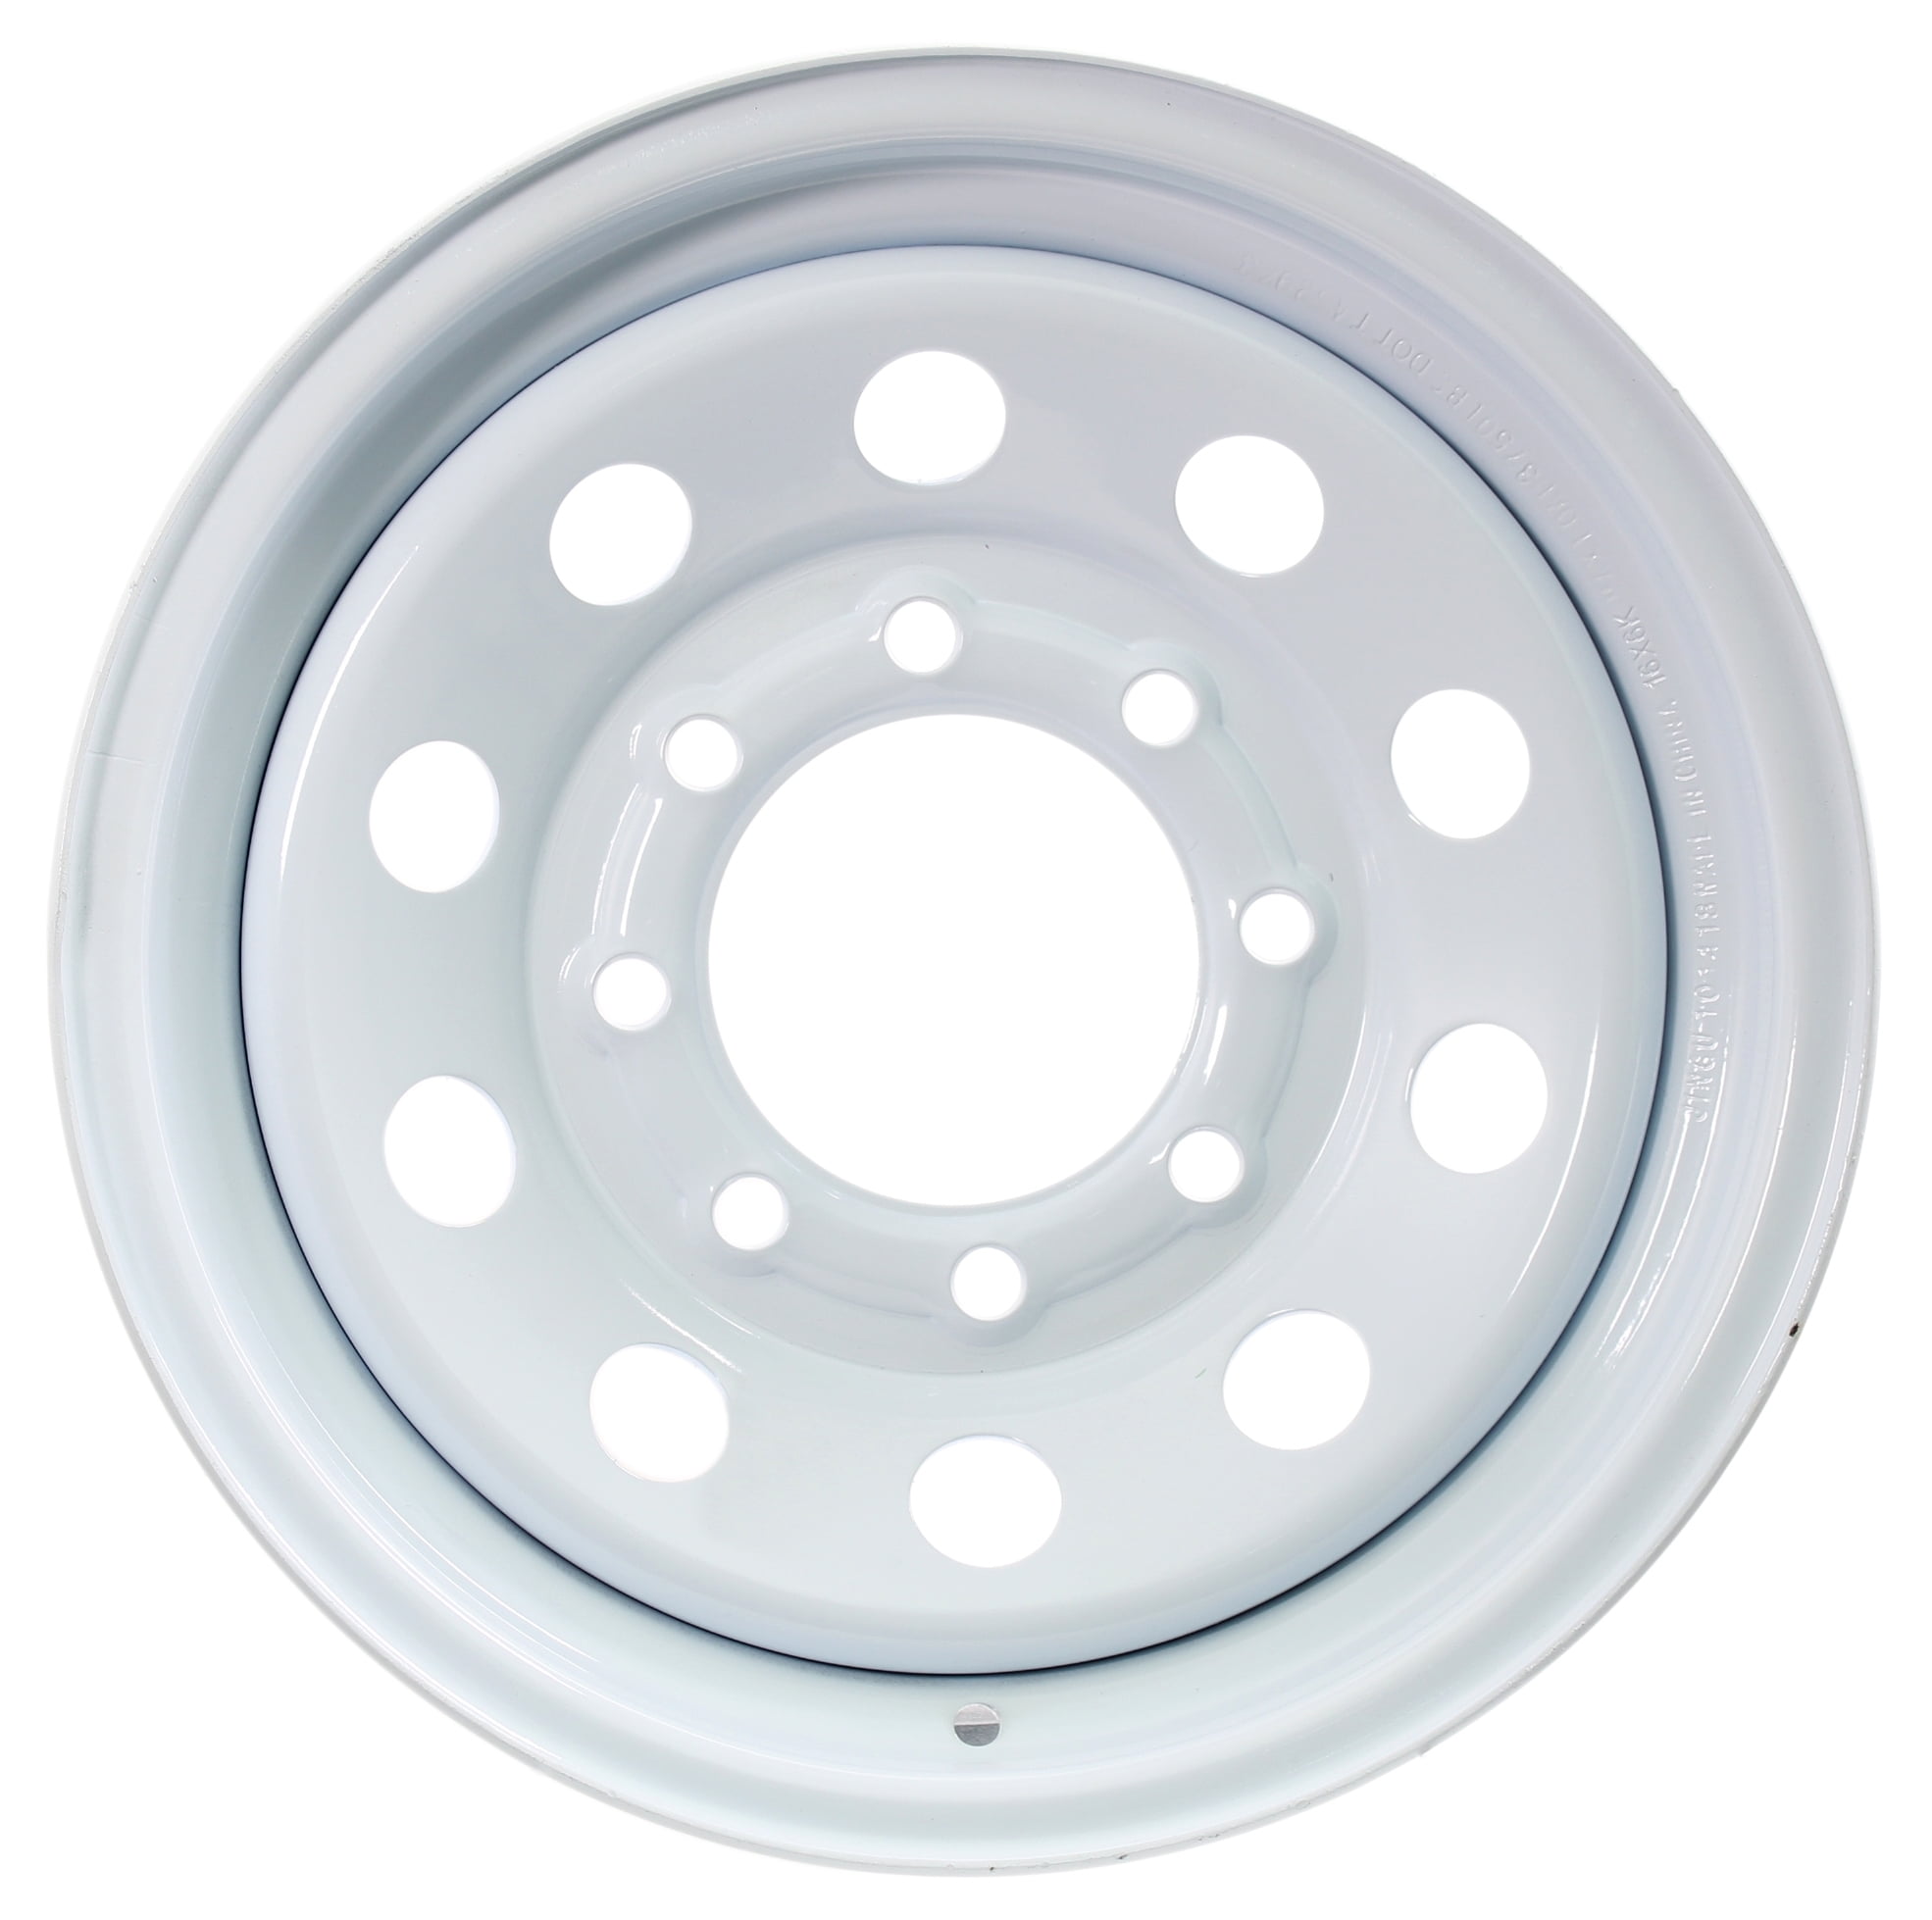 FREE SHIP TRAILER Details about   16" 16 x 6 8/6.5 RIM WHEEL ALUMINUM MACHINED SILVER HORSE 